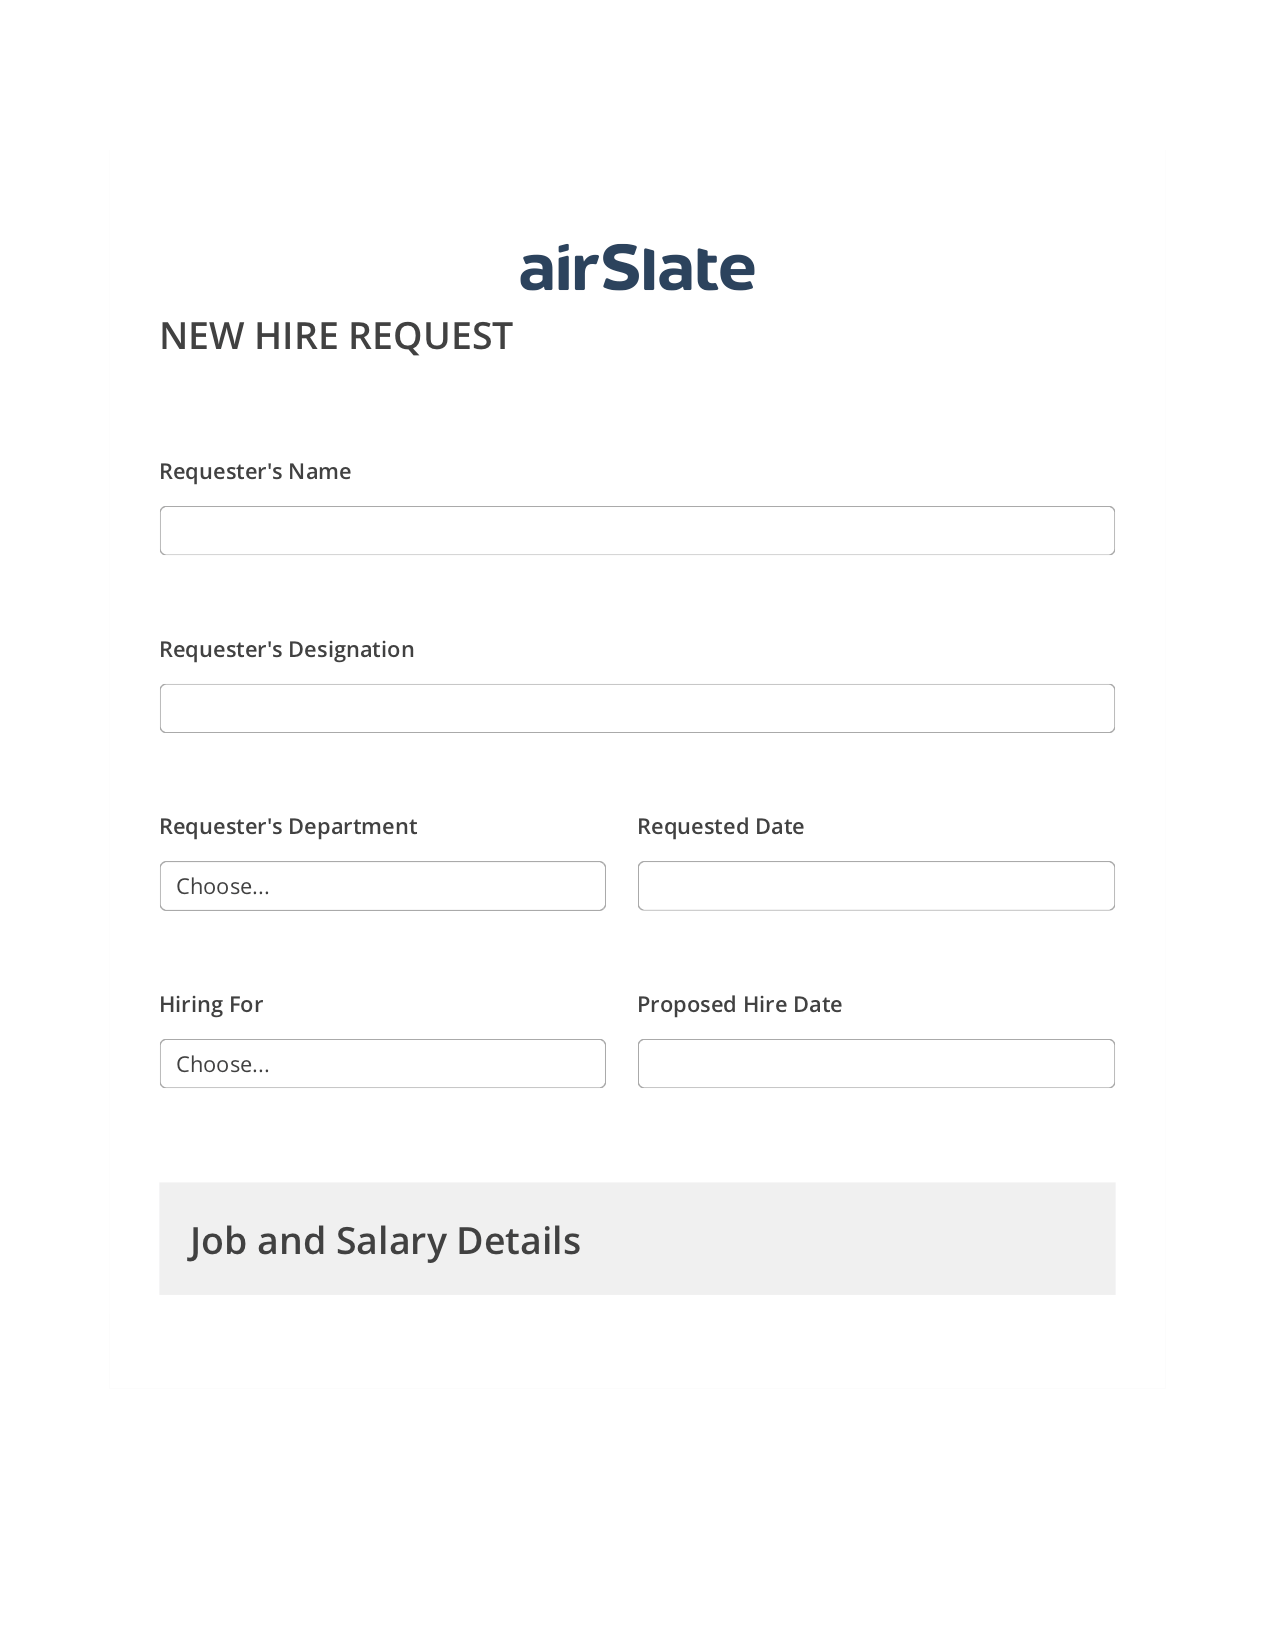 Hiring Request Workflow System Bot - Slack Two-Way Binding Bot, Send a Slate with Roles Bot, Export to Smartsheet